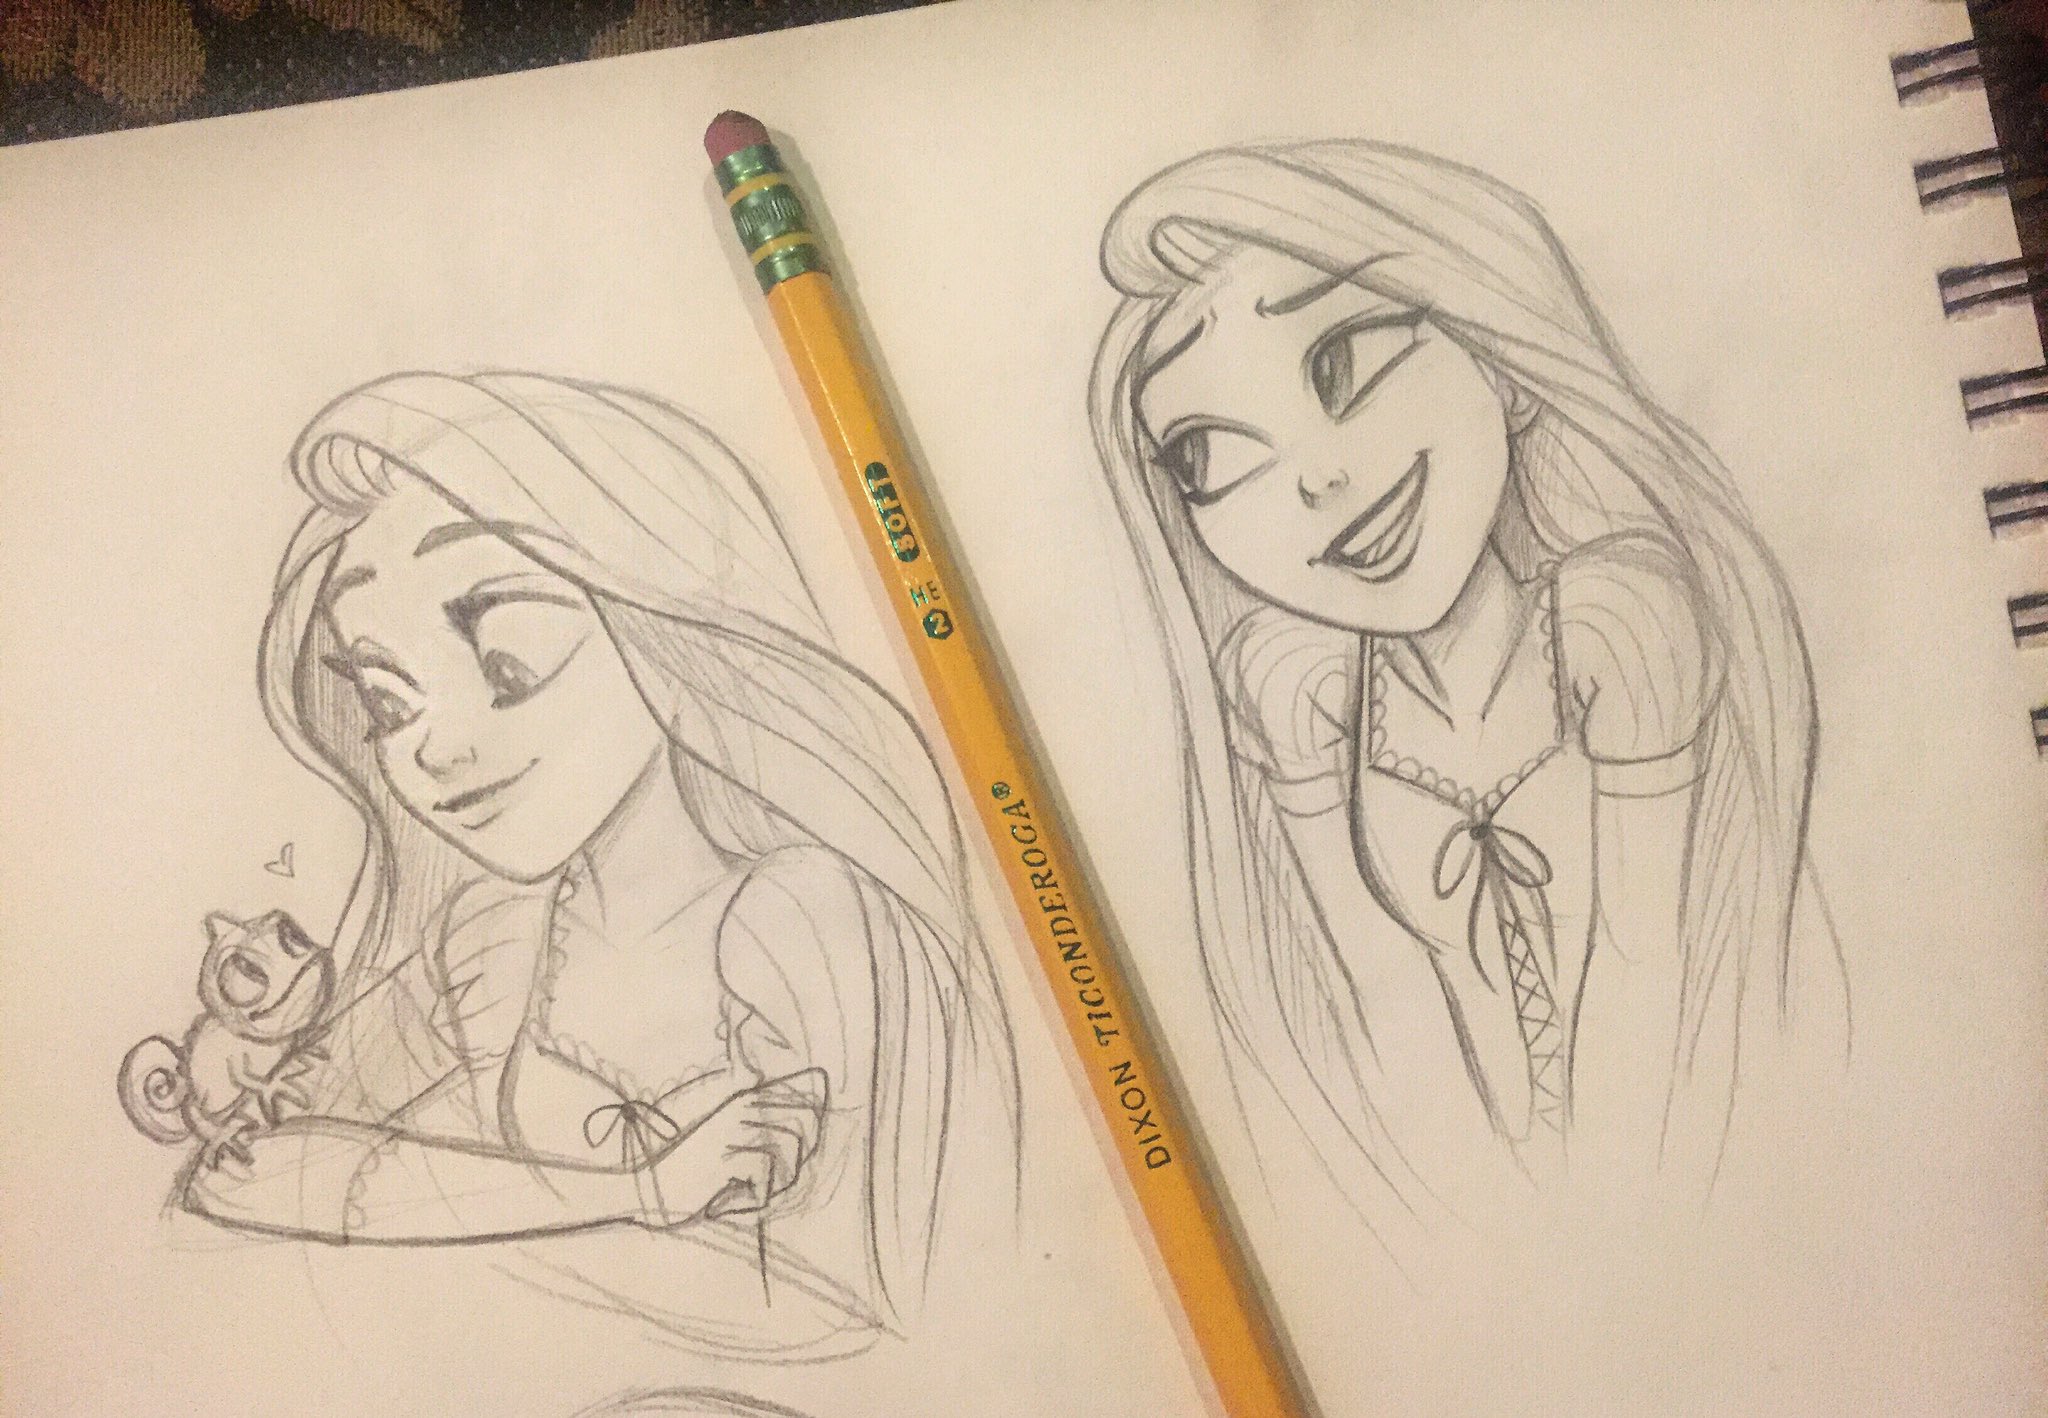 Angie Nasca on Twitter: "Rapunzel sketches! It's been a ...